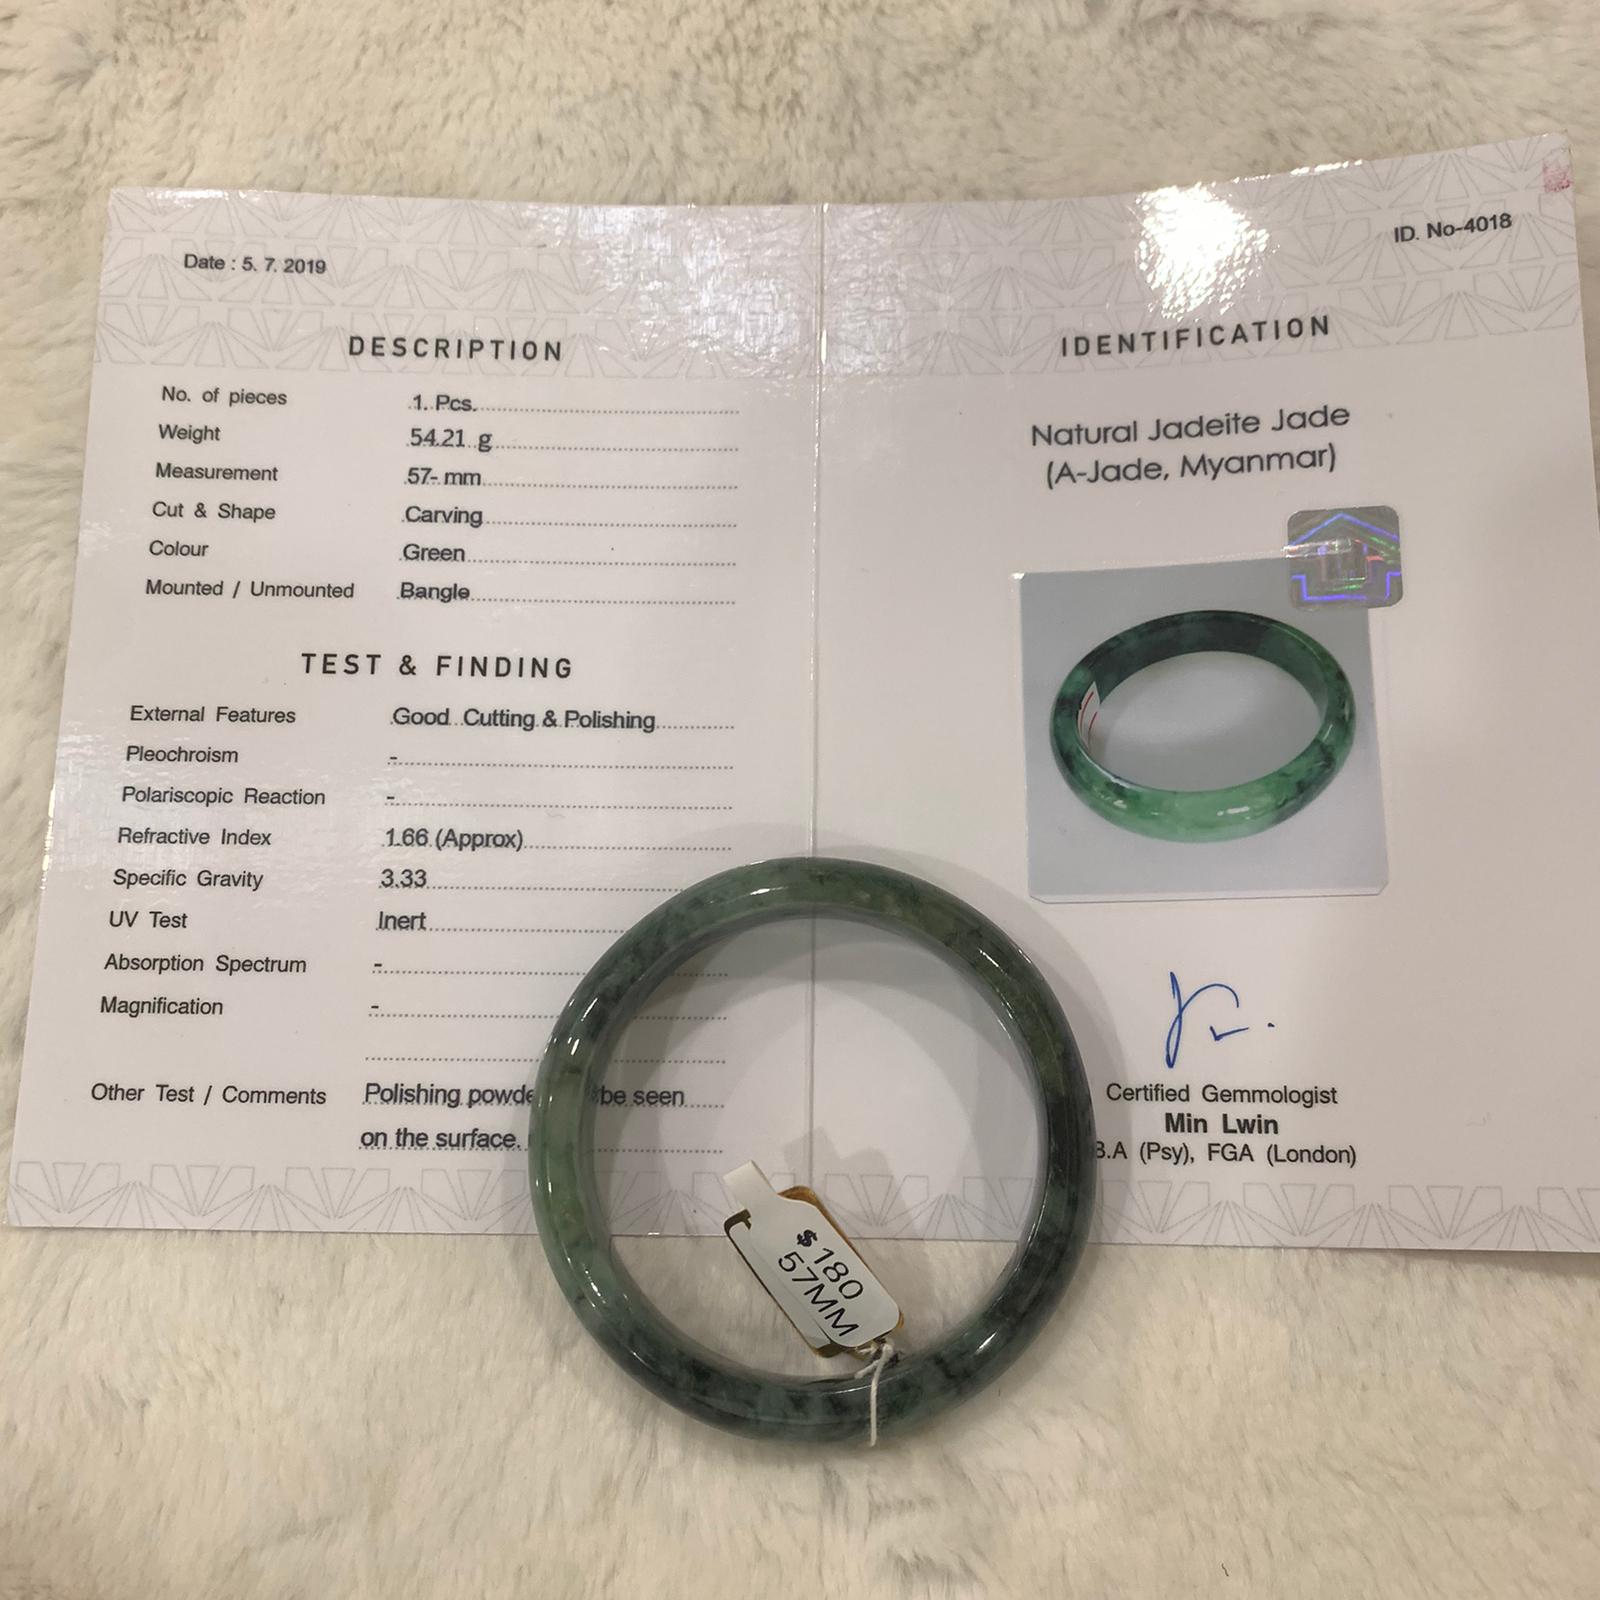 Grade A Natural Jade Bangle with certificate #4018